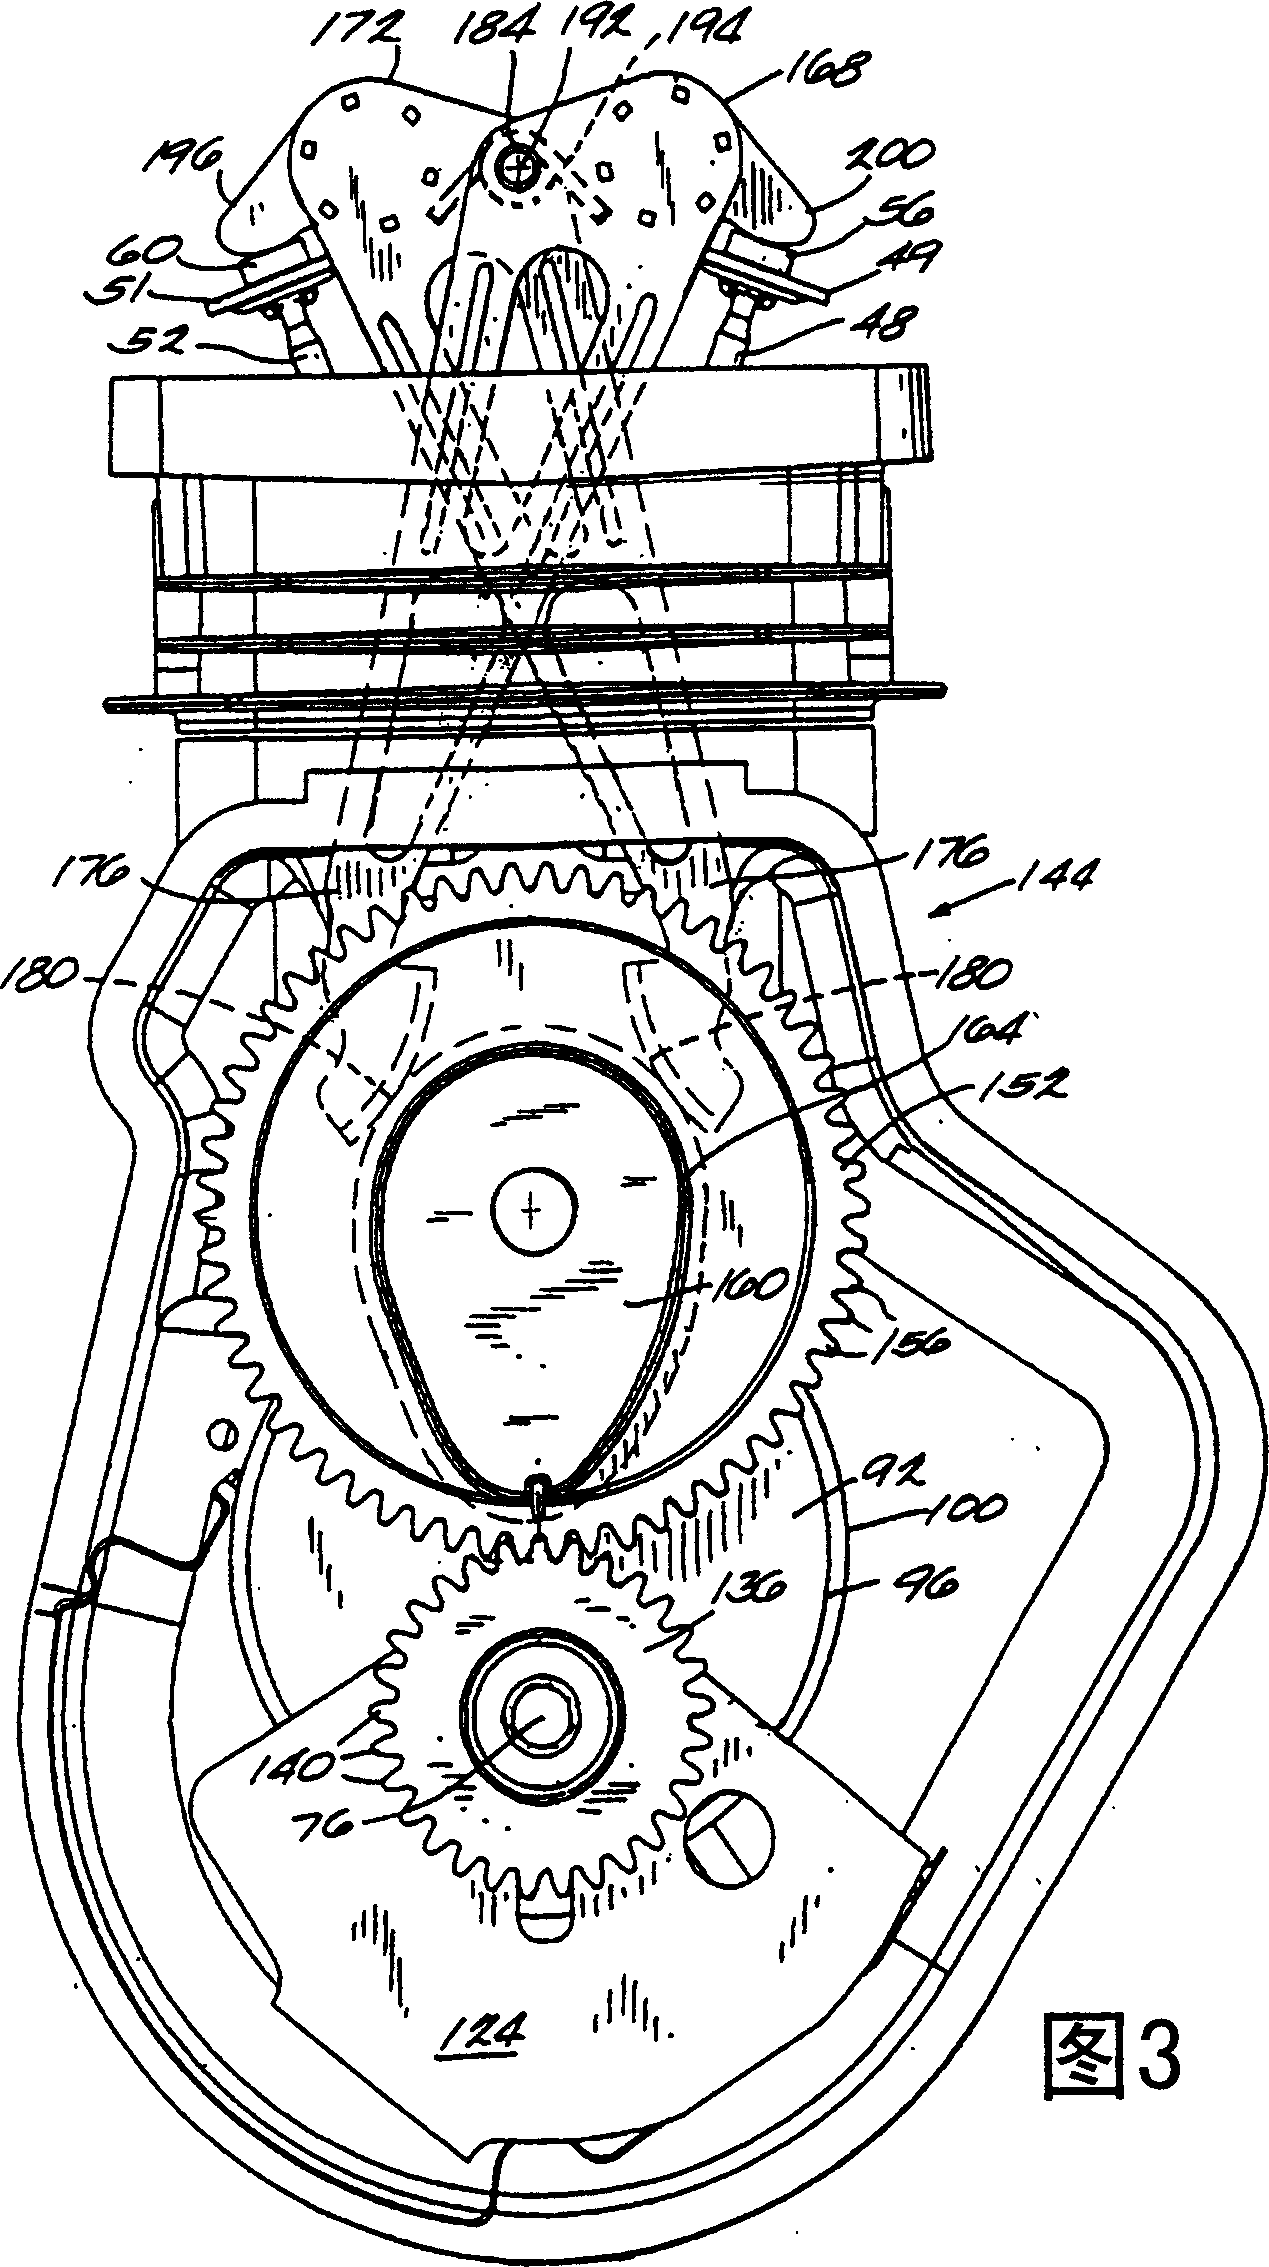 Direct lever overhead valve system